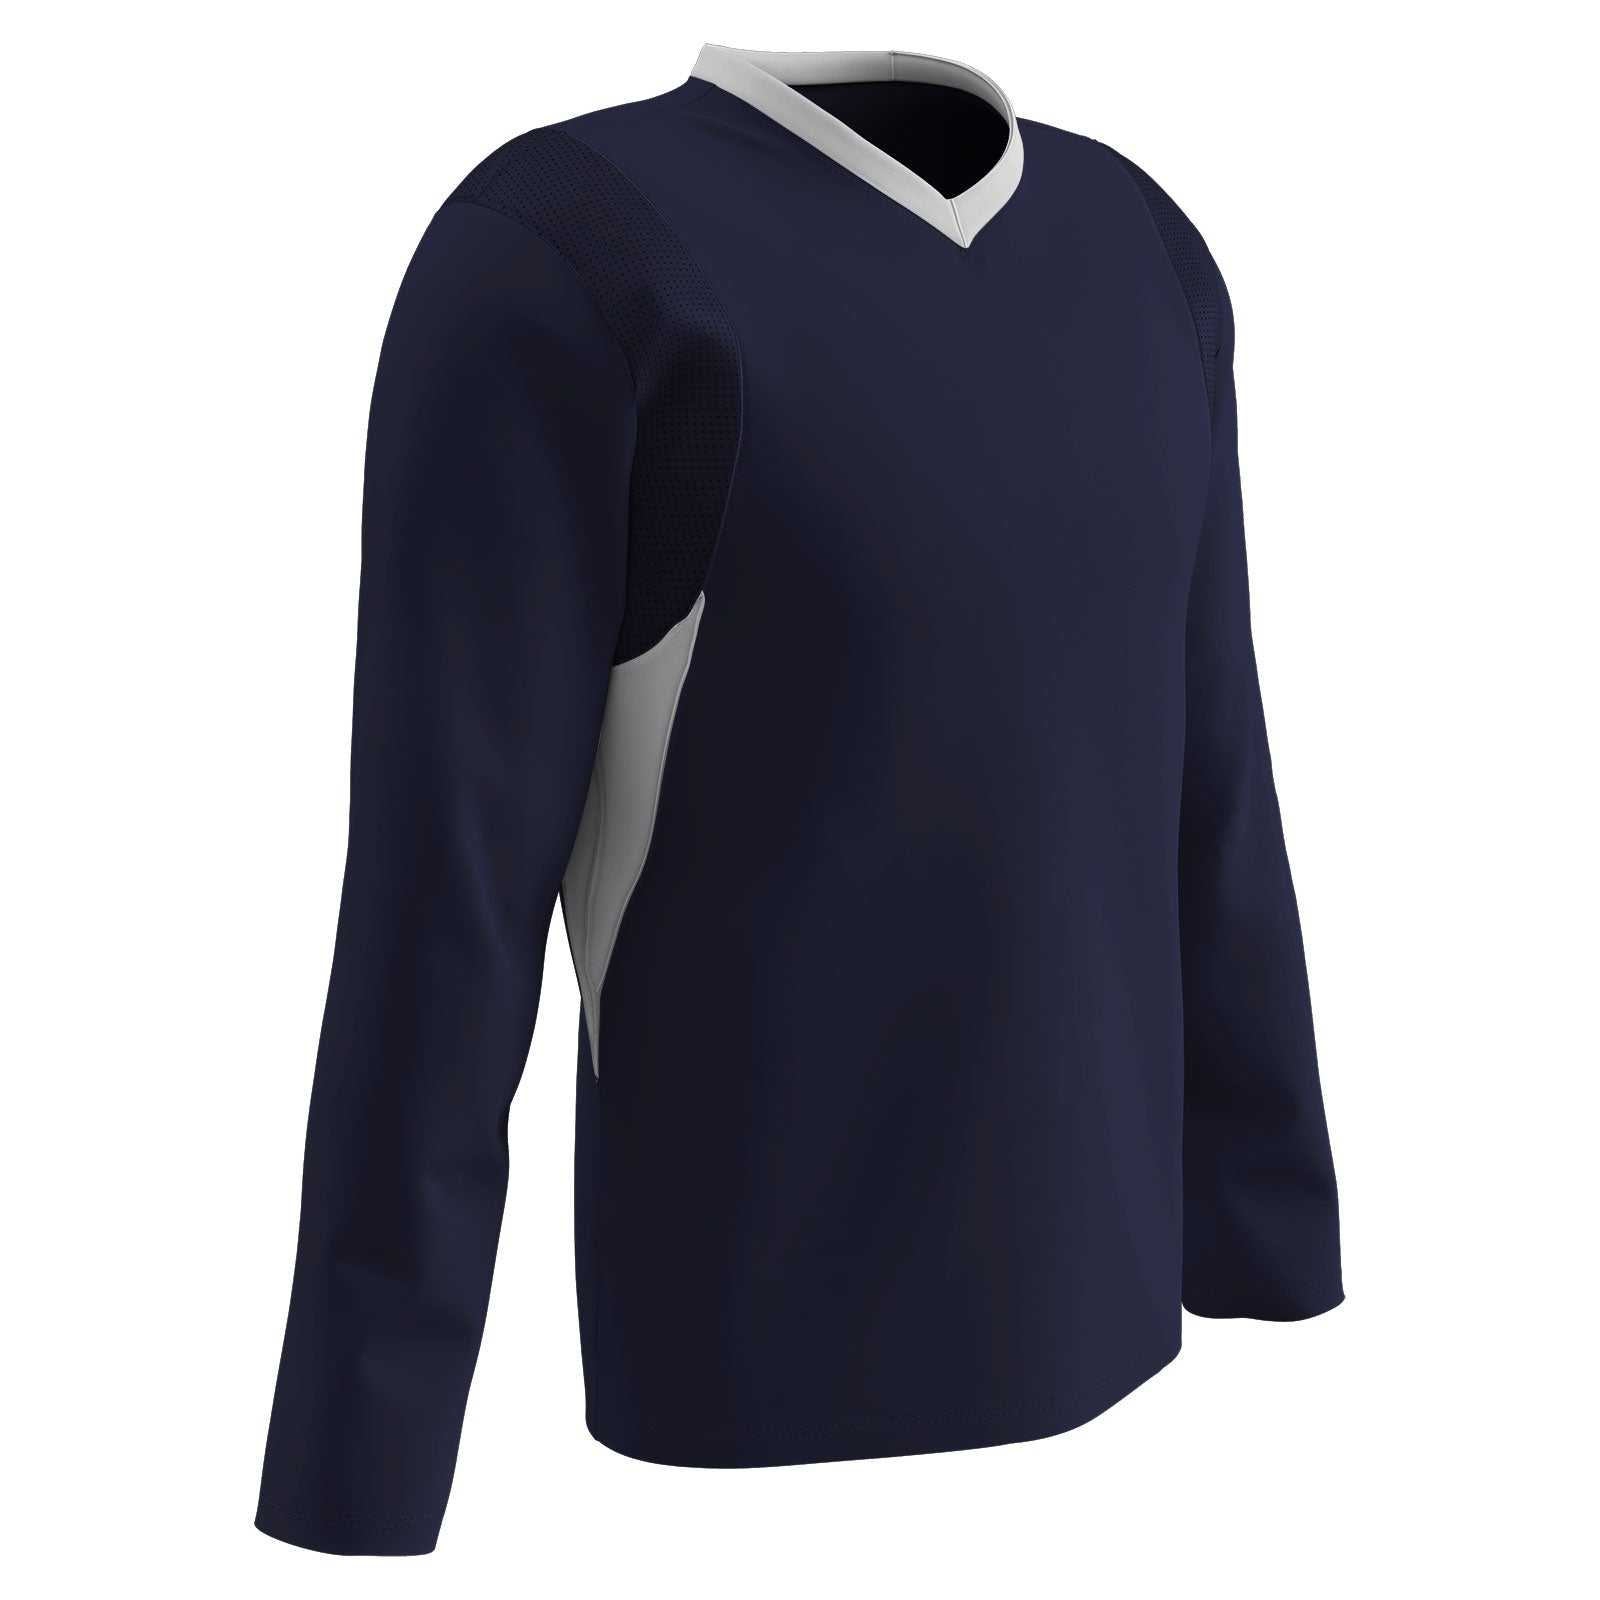 Champro BST16 Key Shooter Shirt - Navy White - HIT a Double